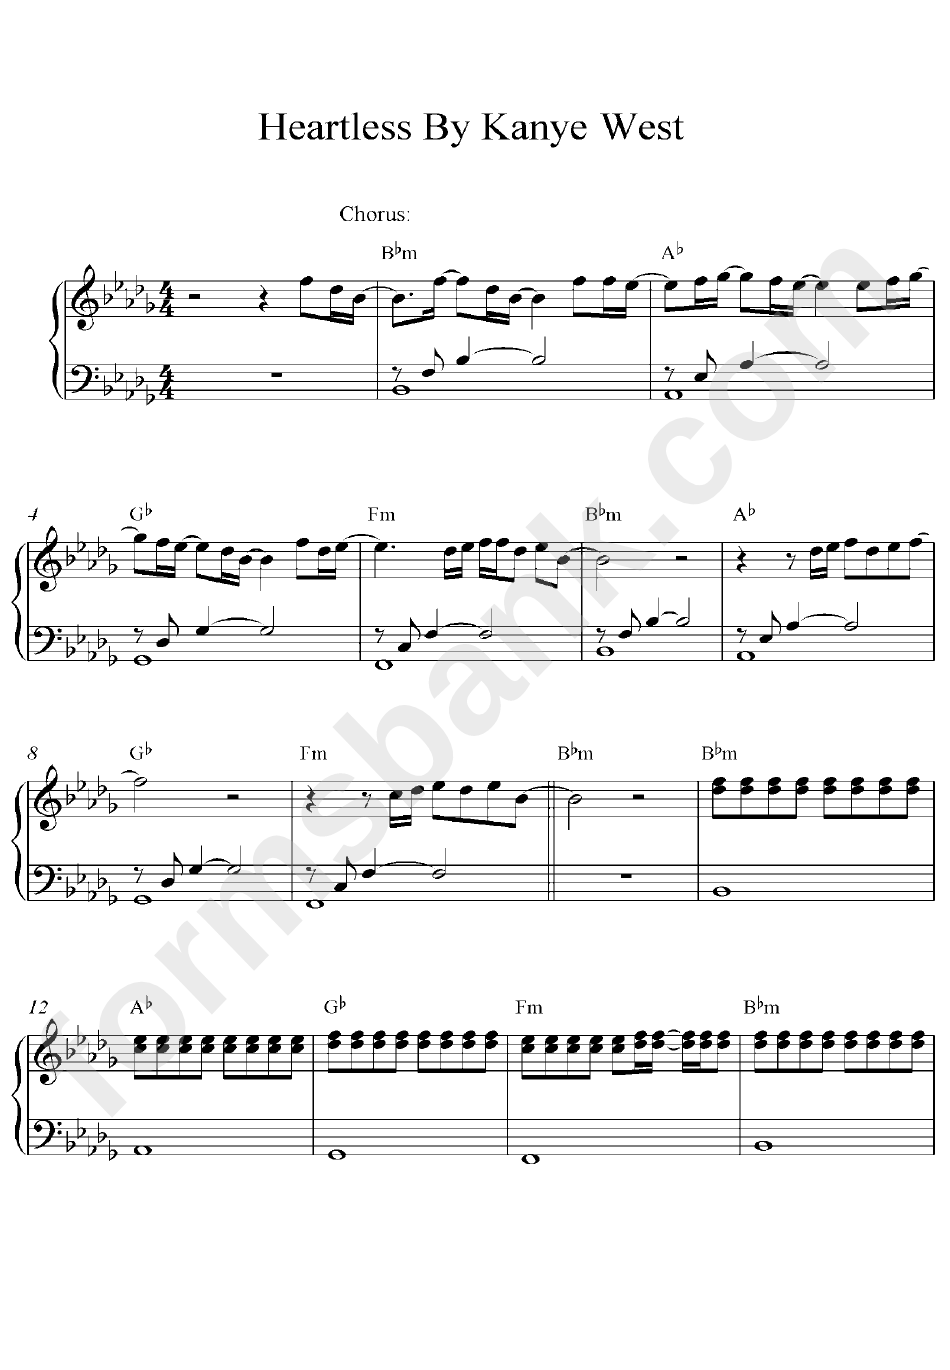 Heartless By Kanye West Piano Sheet Music printable pdf download